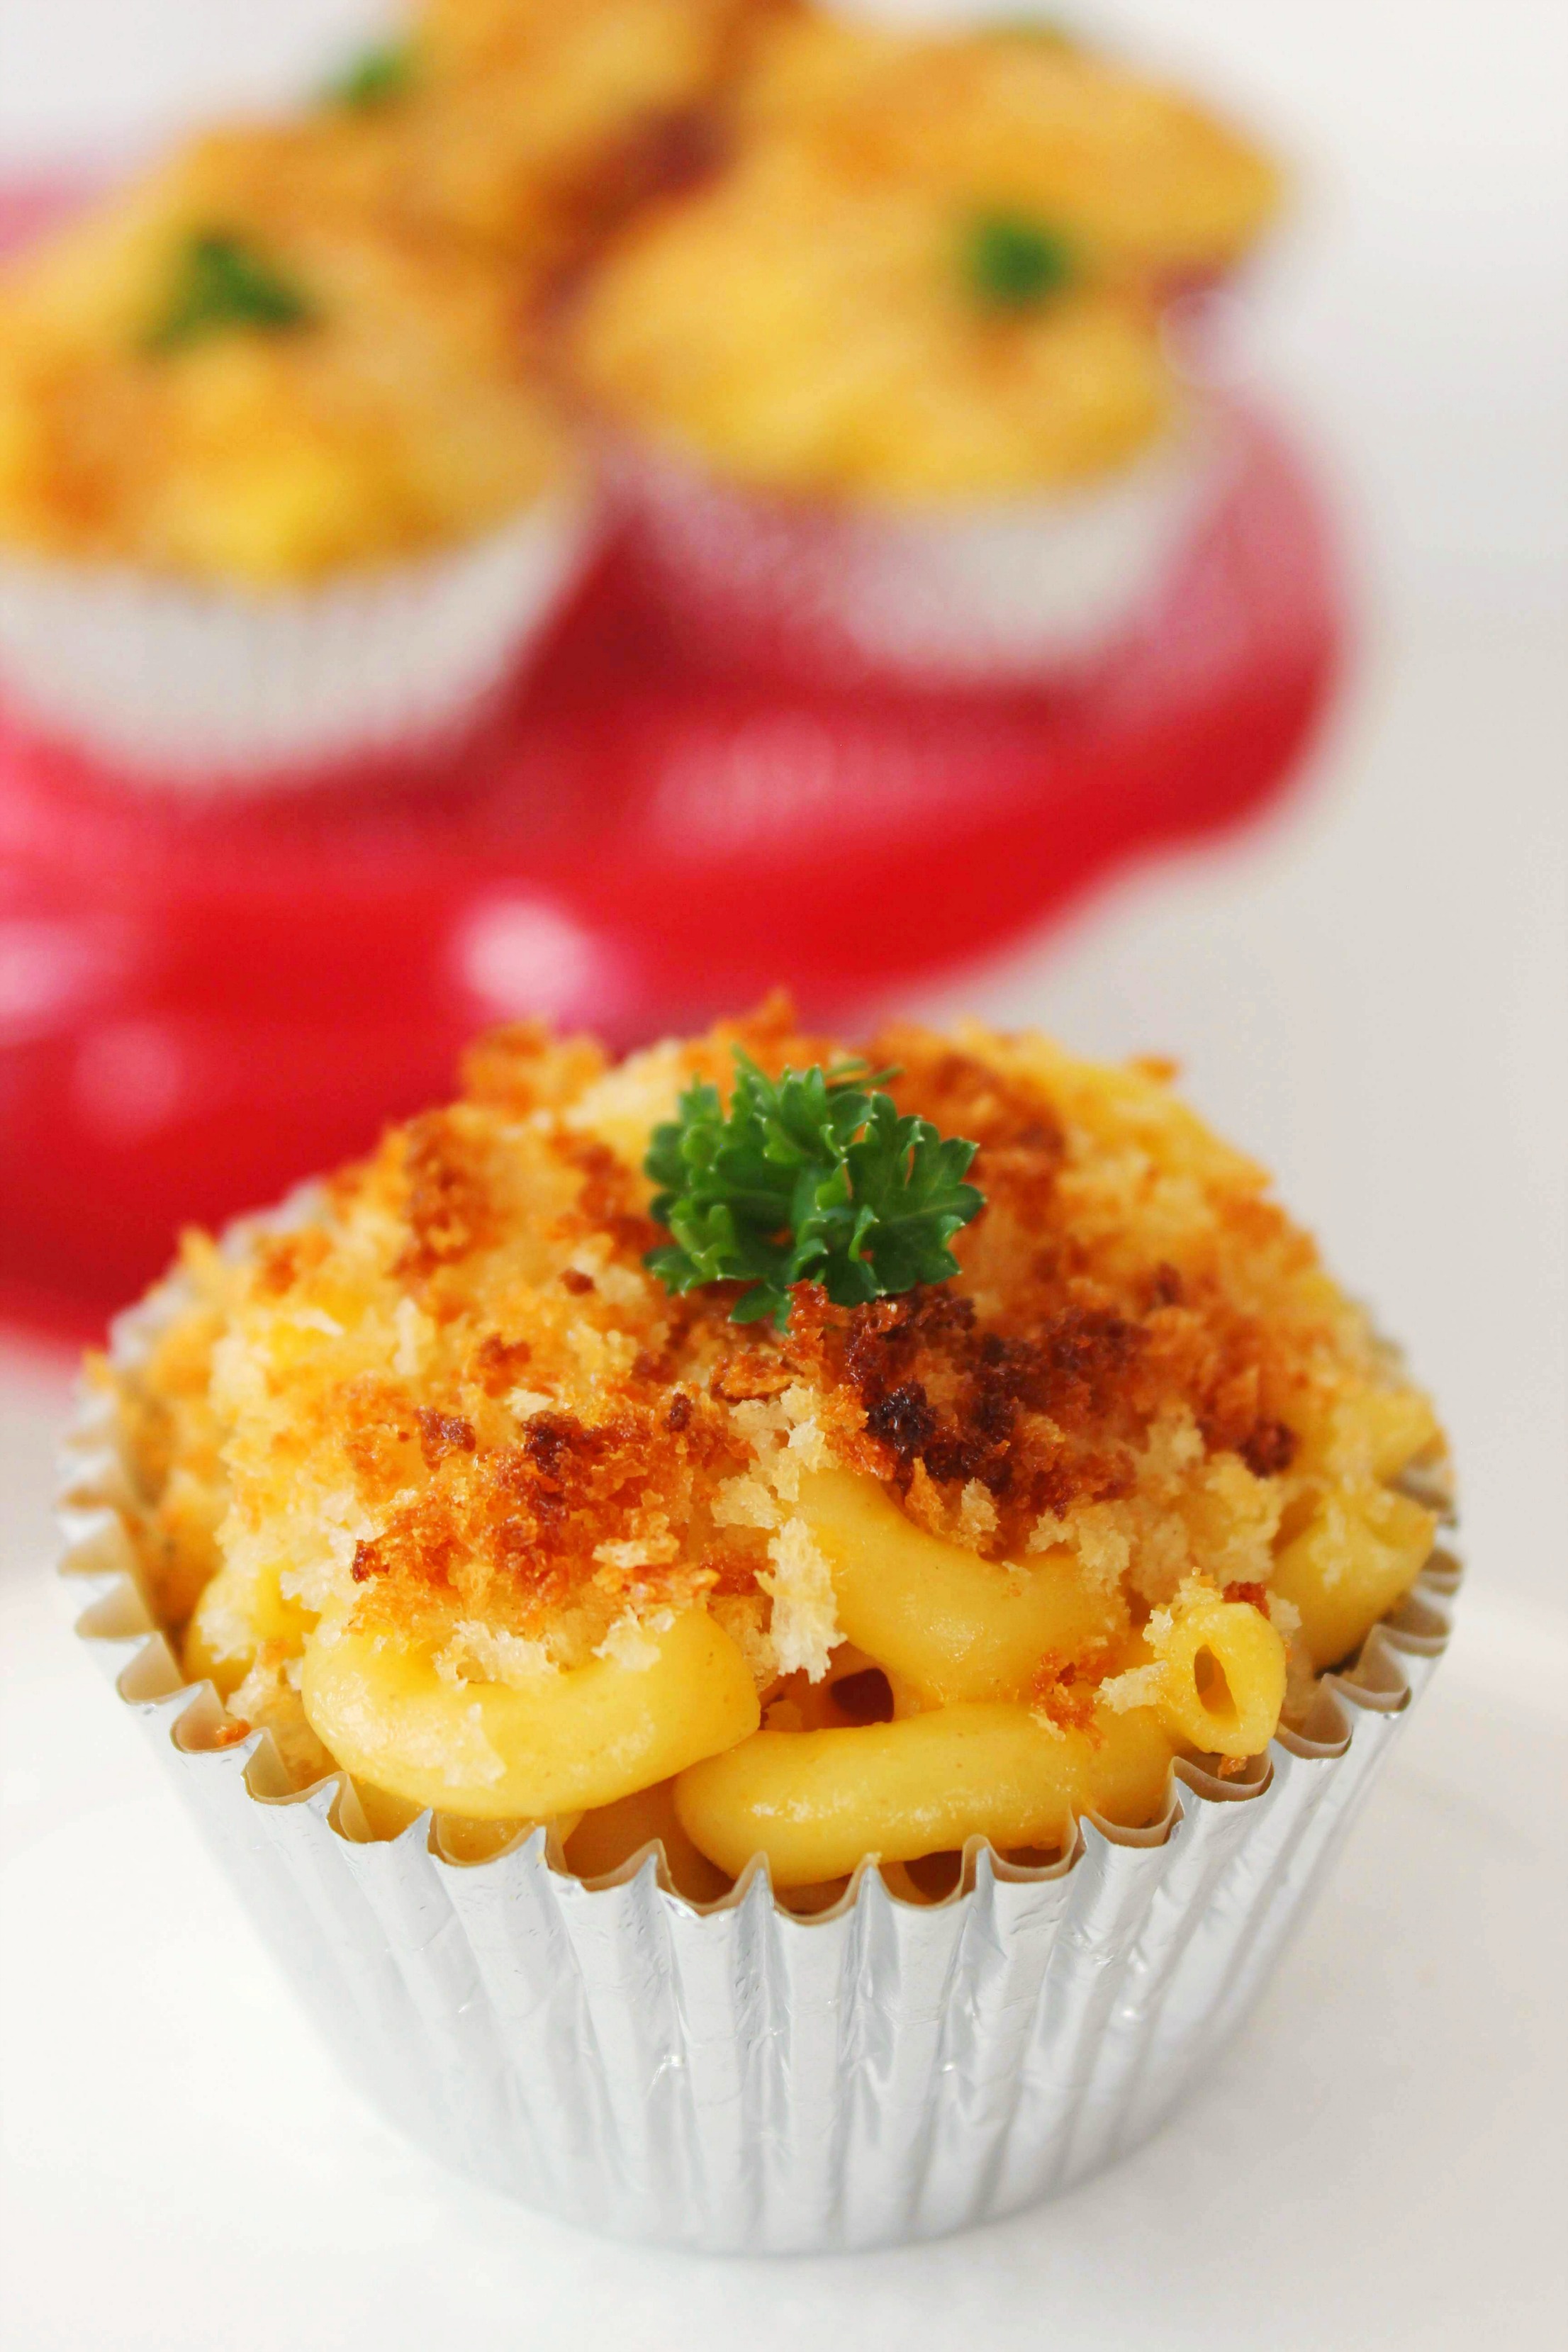 Basically every kid loves Mac & cheese, and these Mac & Cheese muffins are a fun twist on the classic macaroni and cheese recipe to make an even more kid friendly meal. 